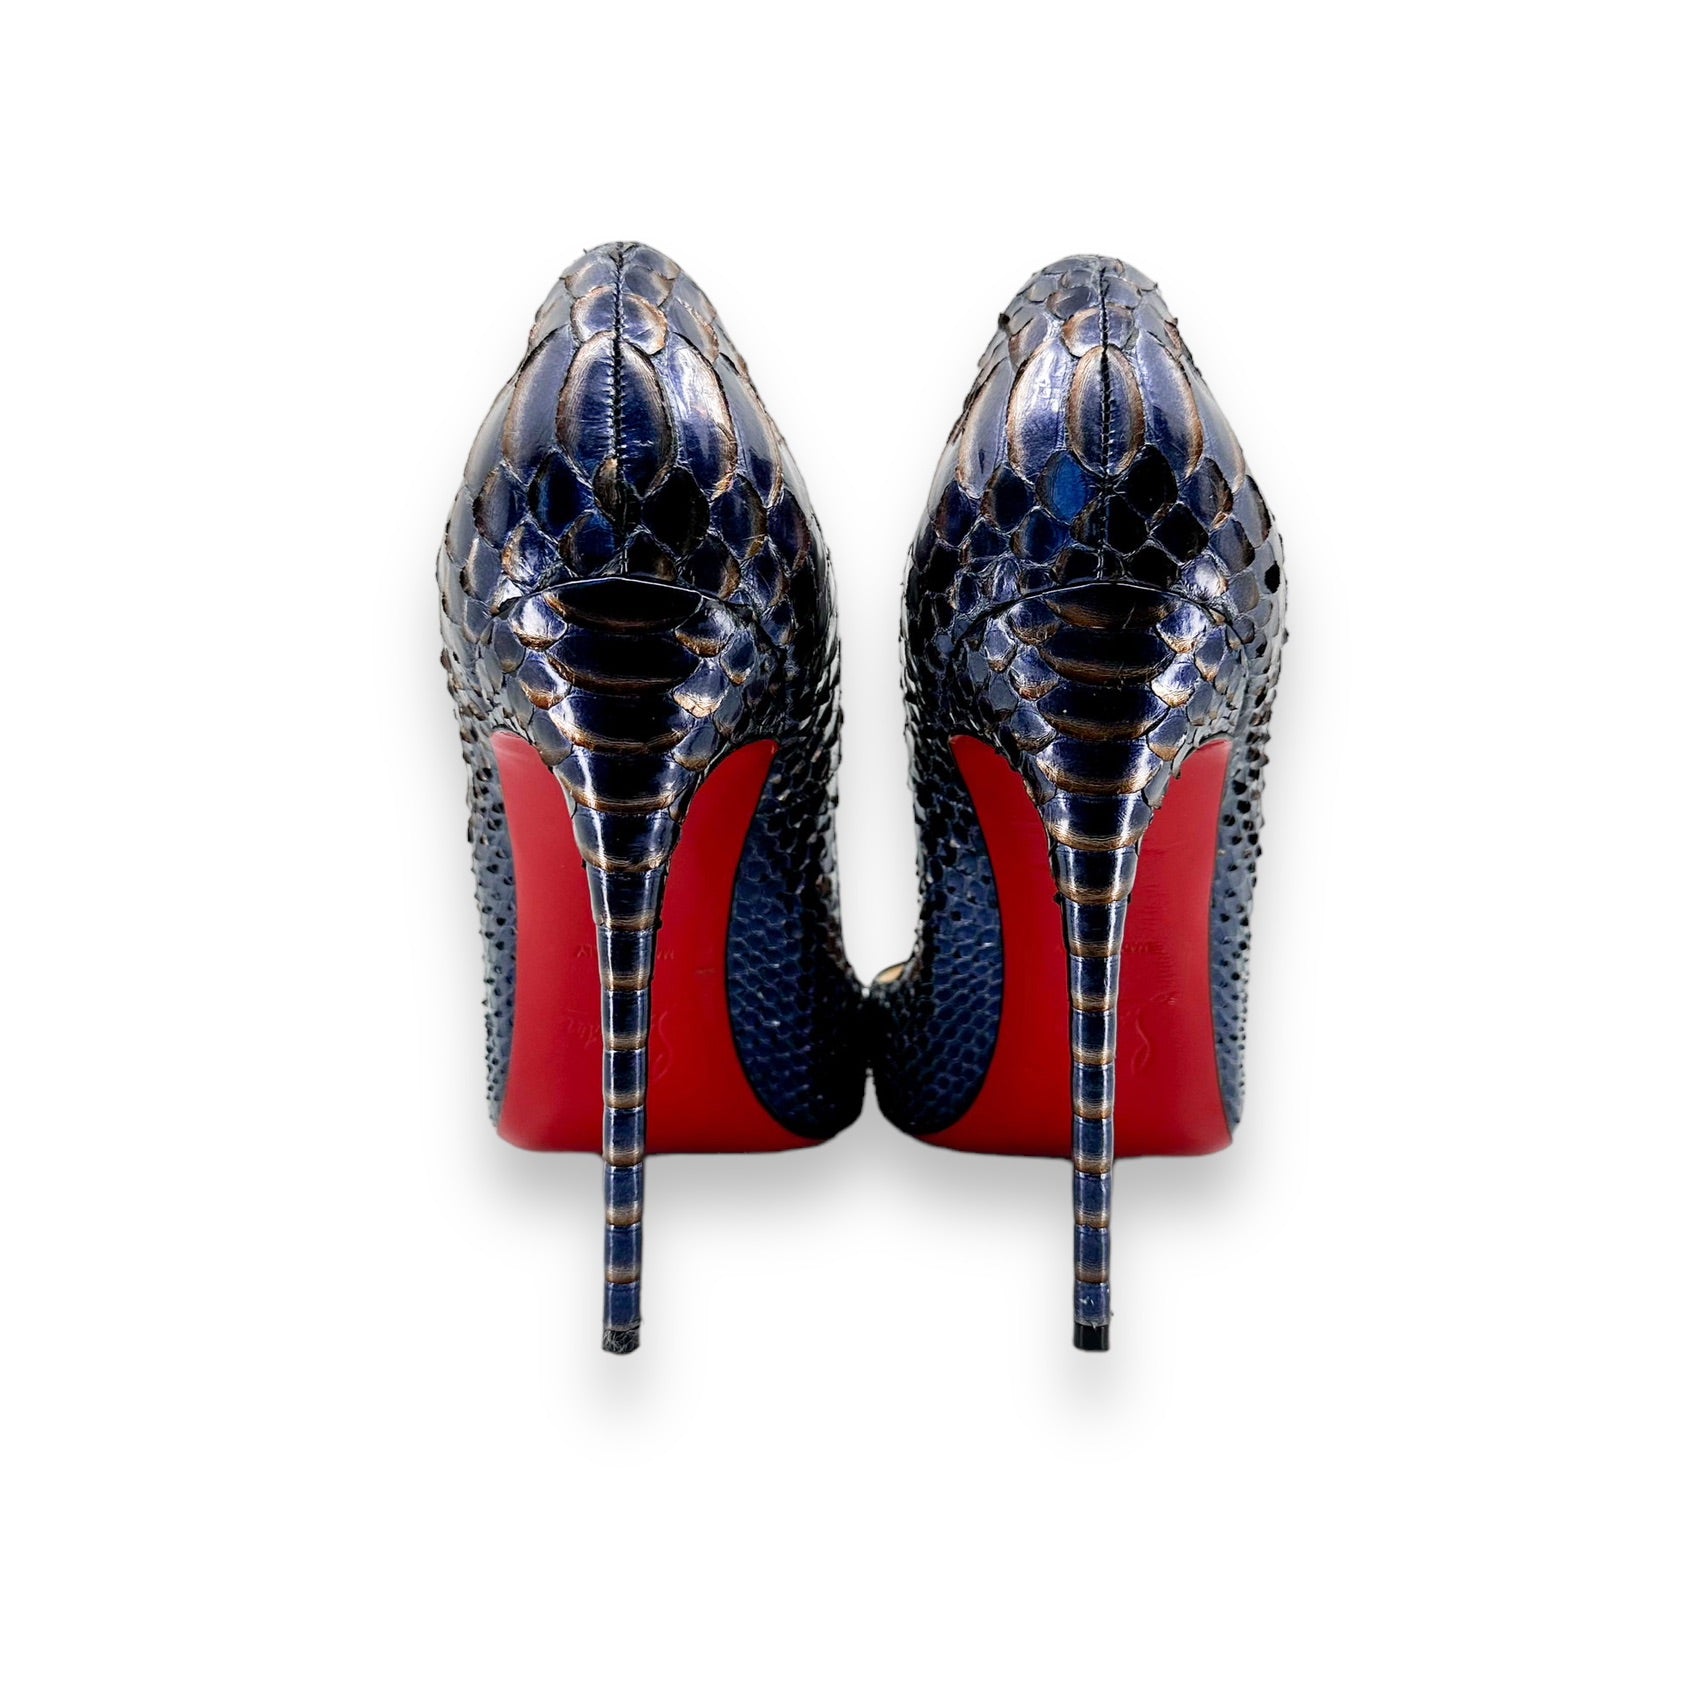 CHRISTIAN LOUBOUTIN So Kate 120mm leather pumps